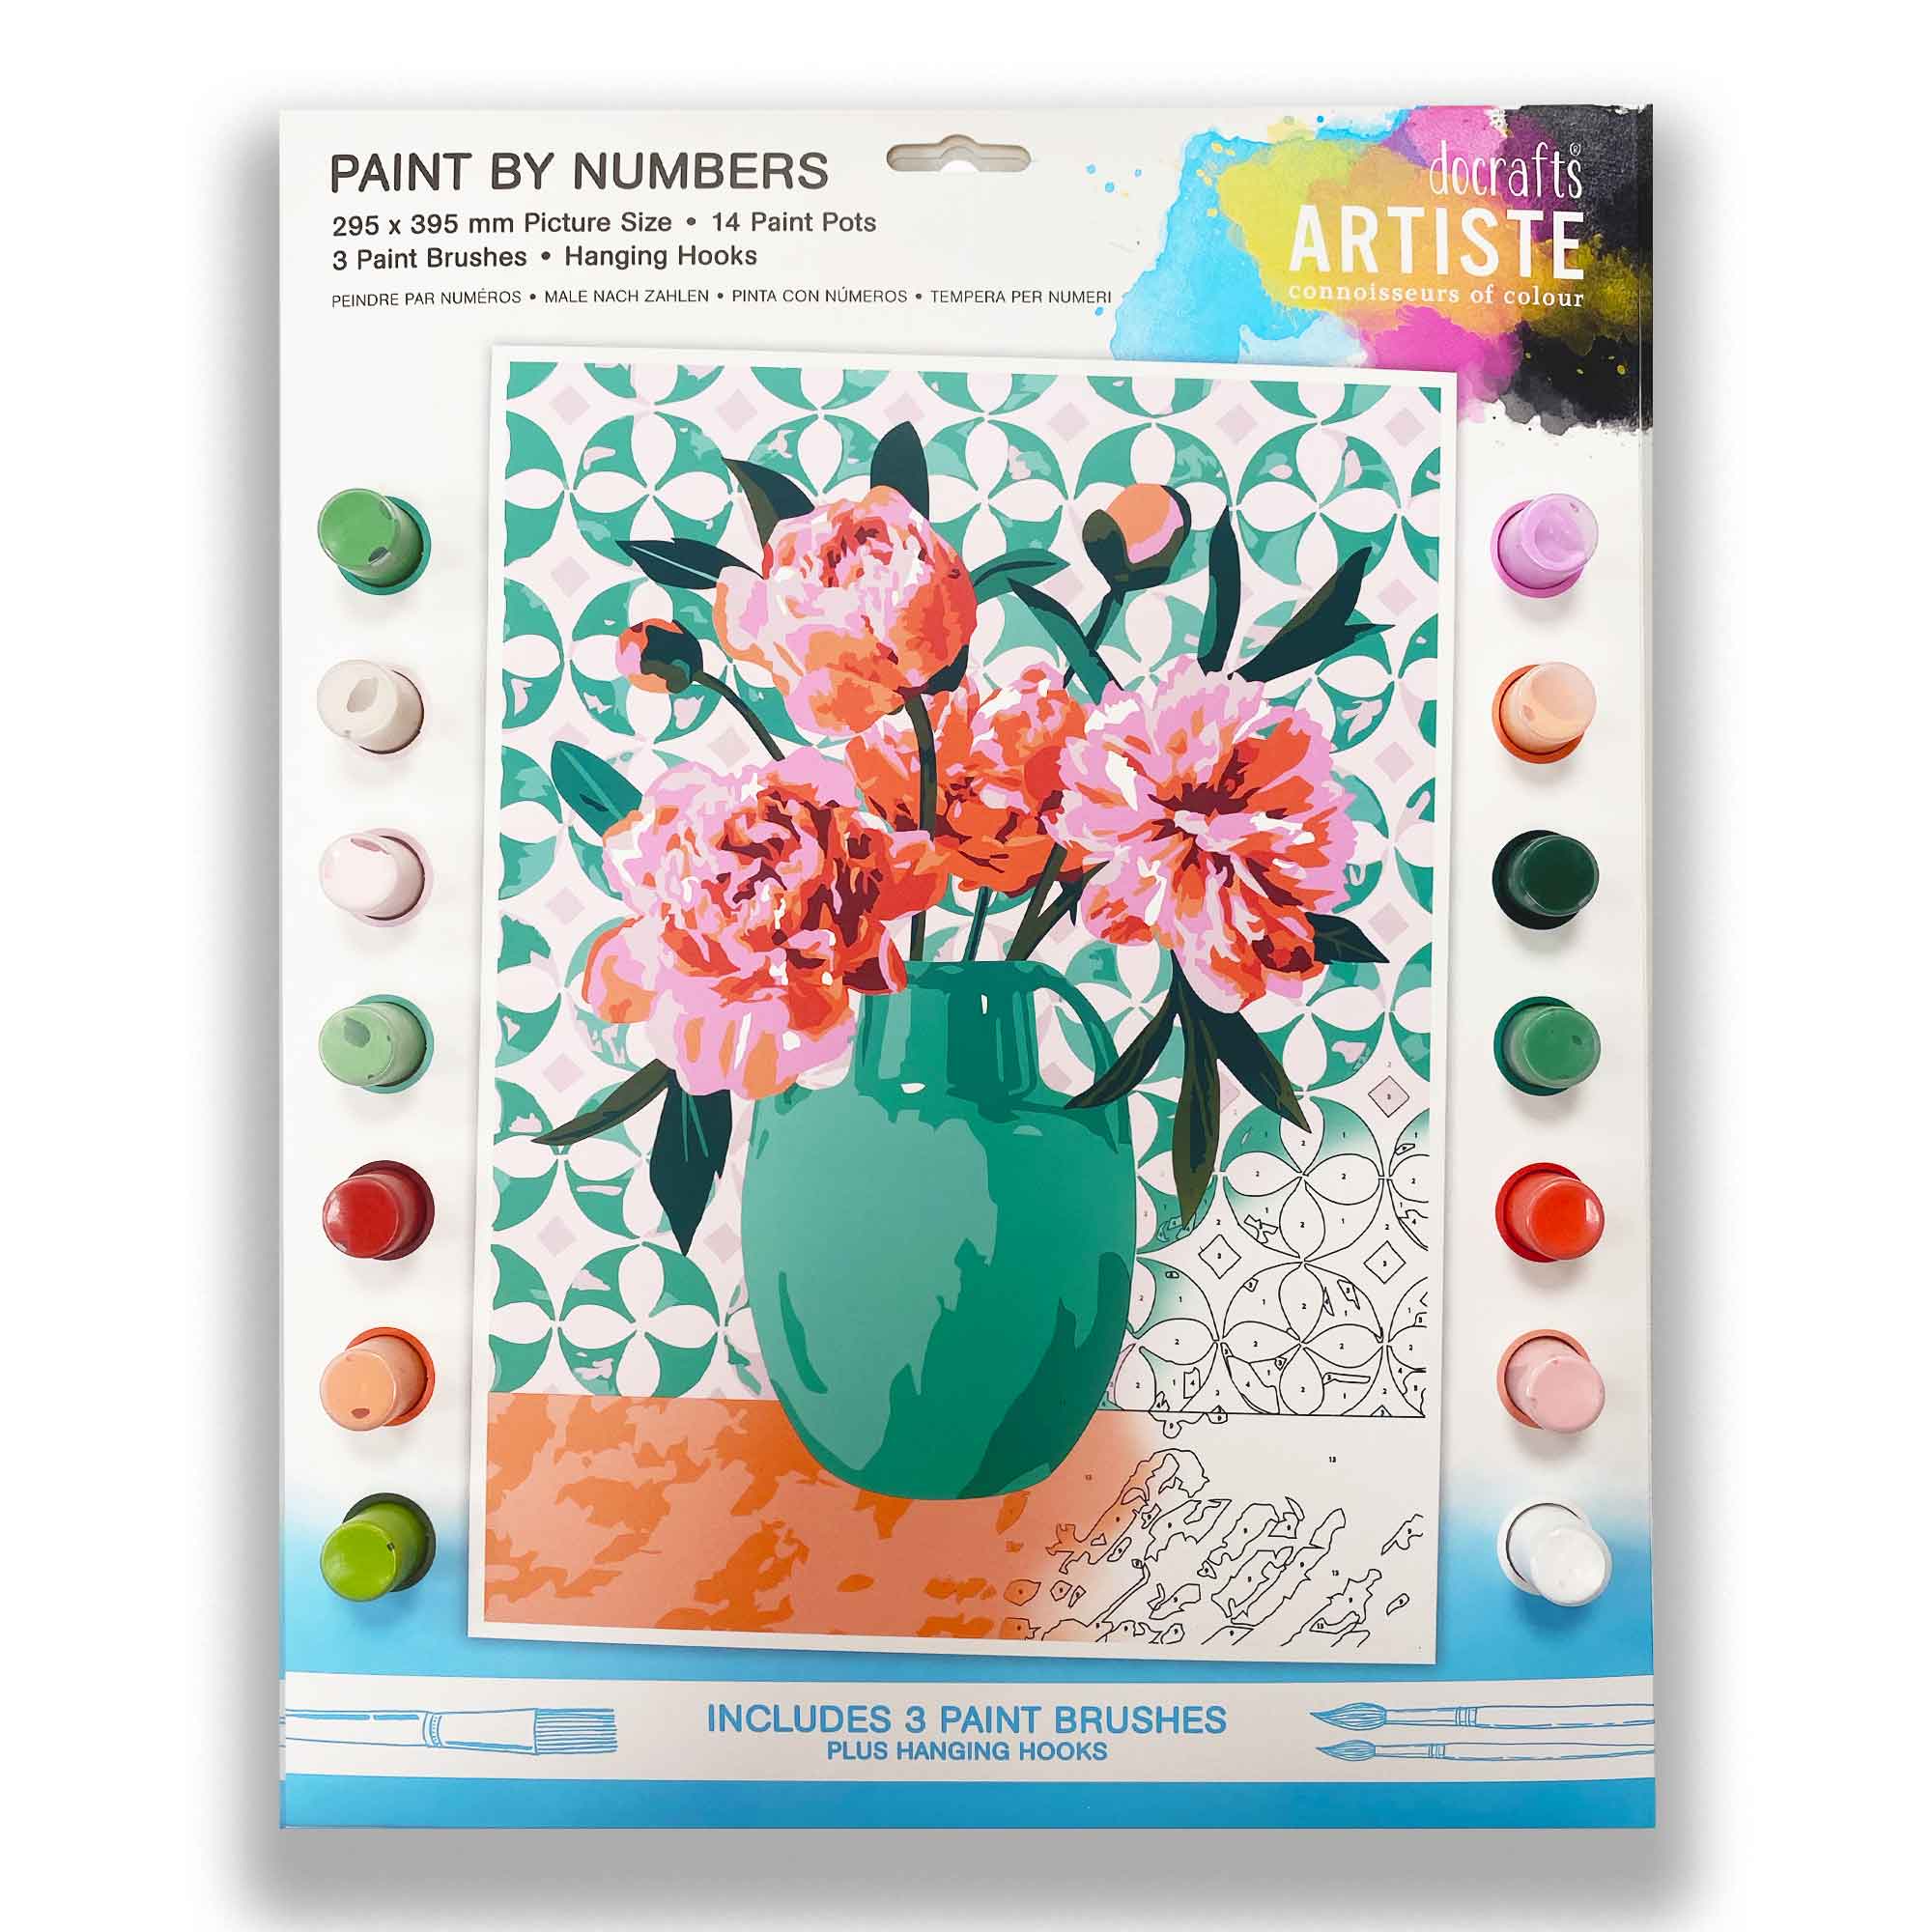 Tabletop Art Easel - Paint by numbers UK